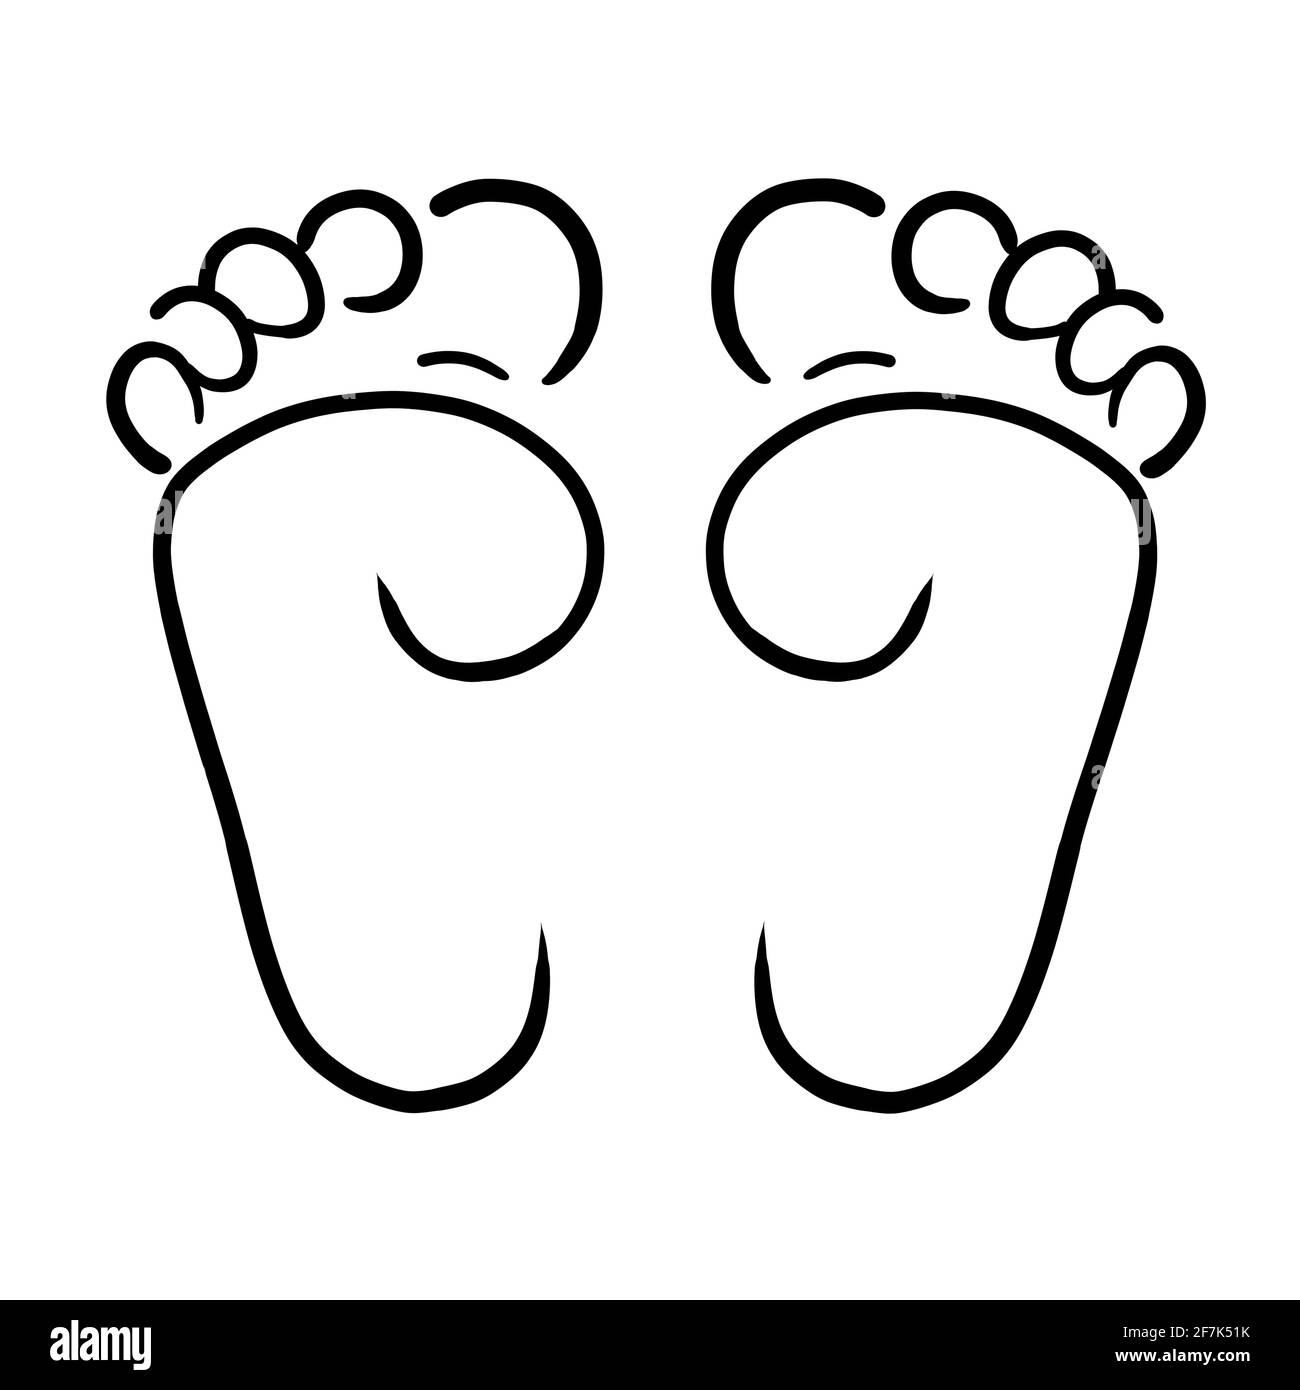 Feet go steps as footprint vector design logo icon toes and sole of foot black white children feet boy barefoot Stock Photo